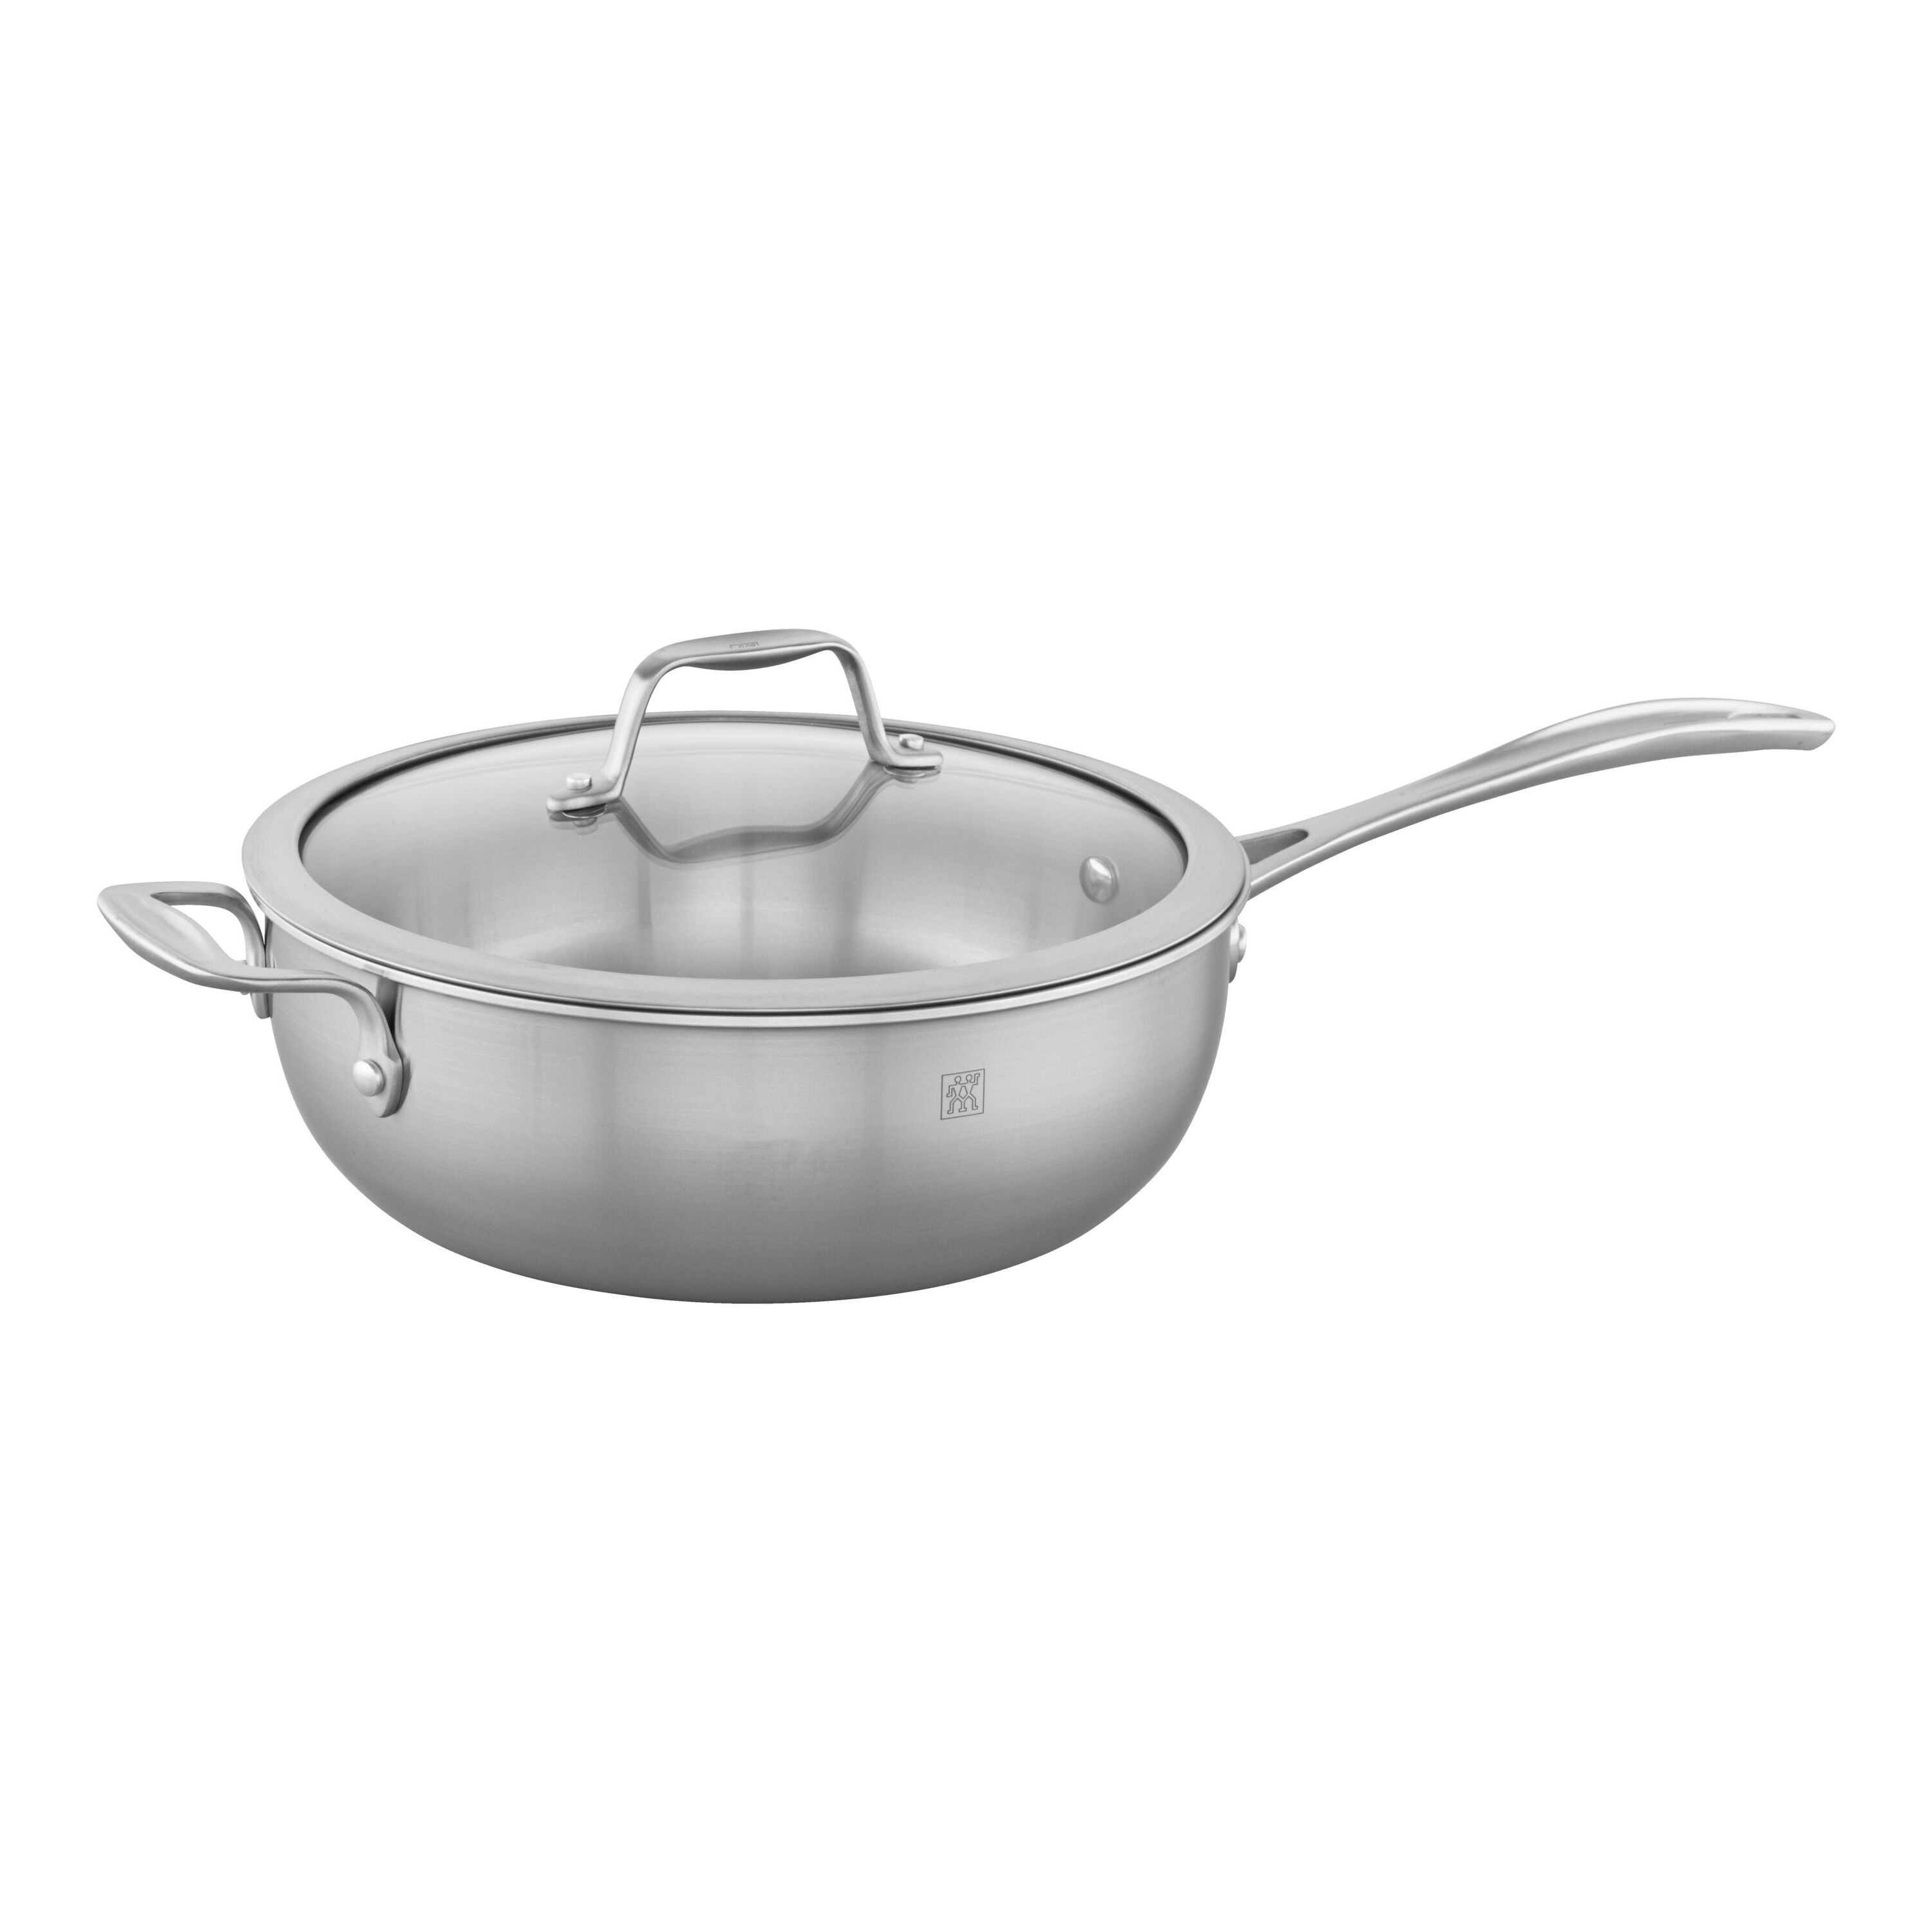 Zwilling Spirit 3-Ply 10 Stainless Steel Fry Pan